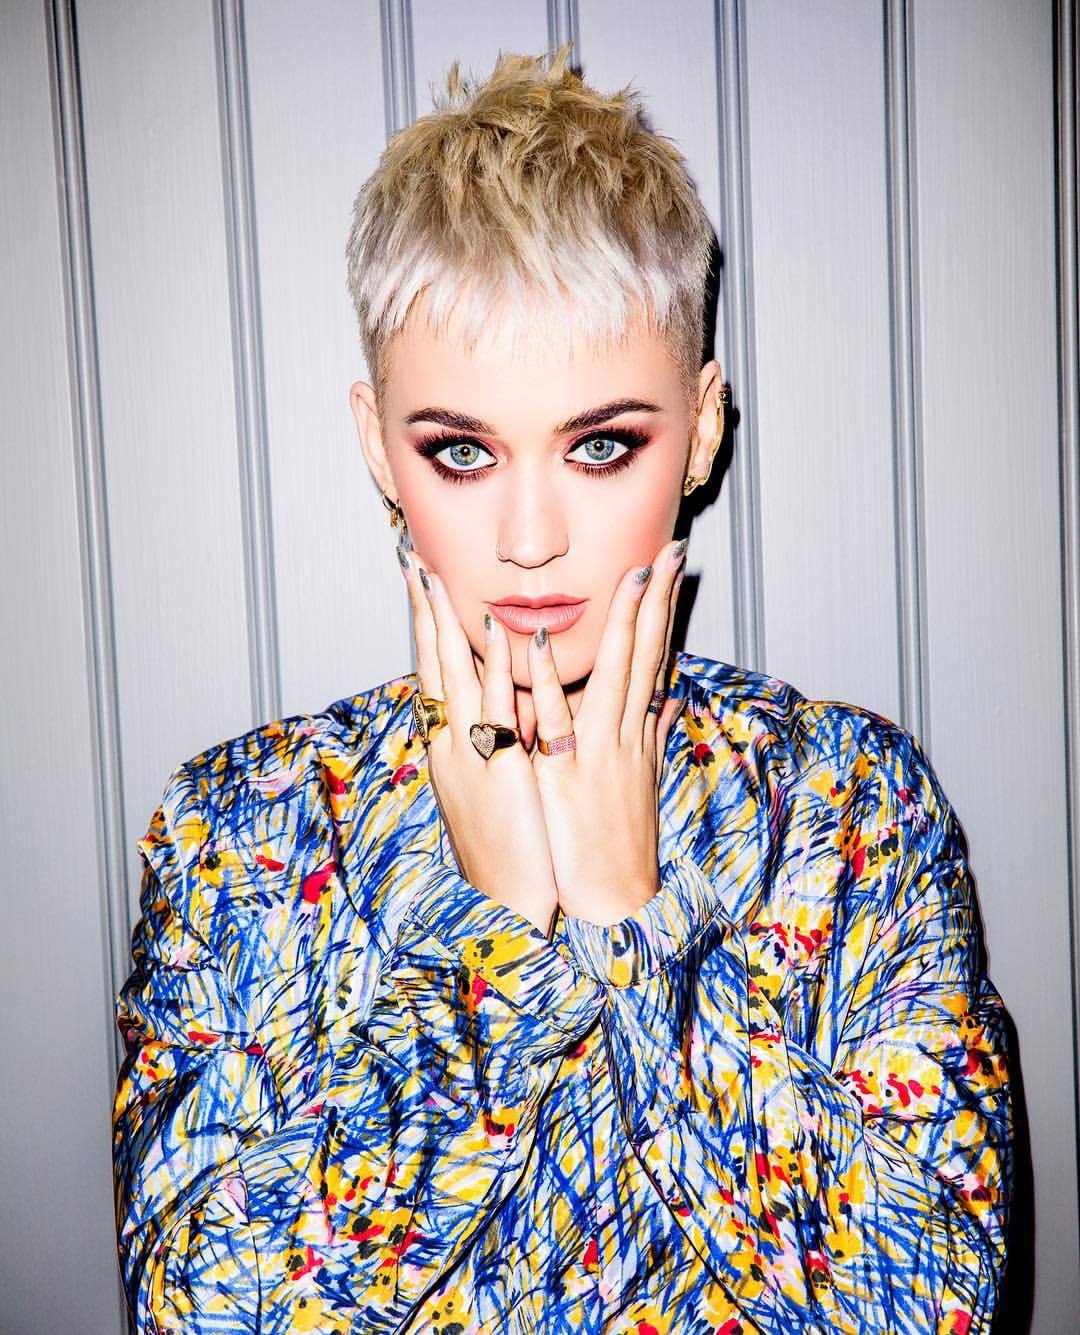 “As @katyperry continues to reinvent herself, the time is now for fans, critics and this millennial to rewind through her album cycles, to better understand what we have come to witness.” - @harkahoo on an editorial feature about the #PurposefulPop...